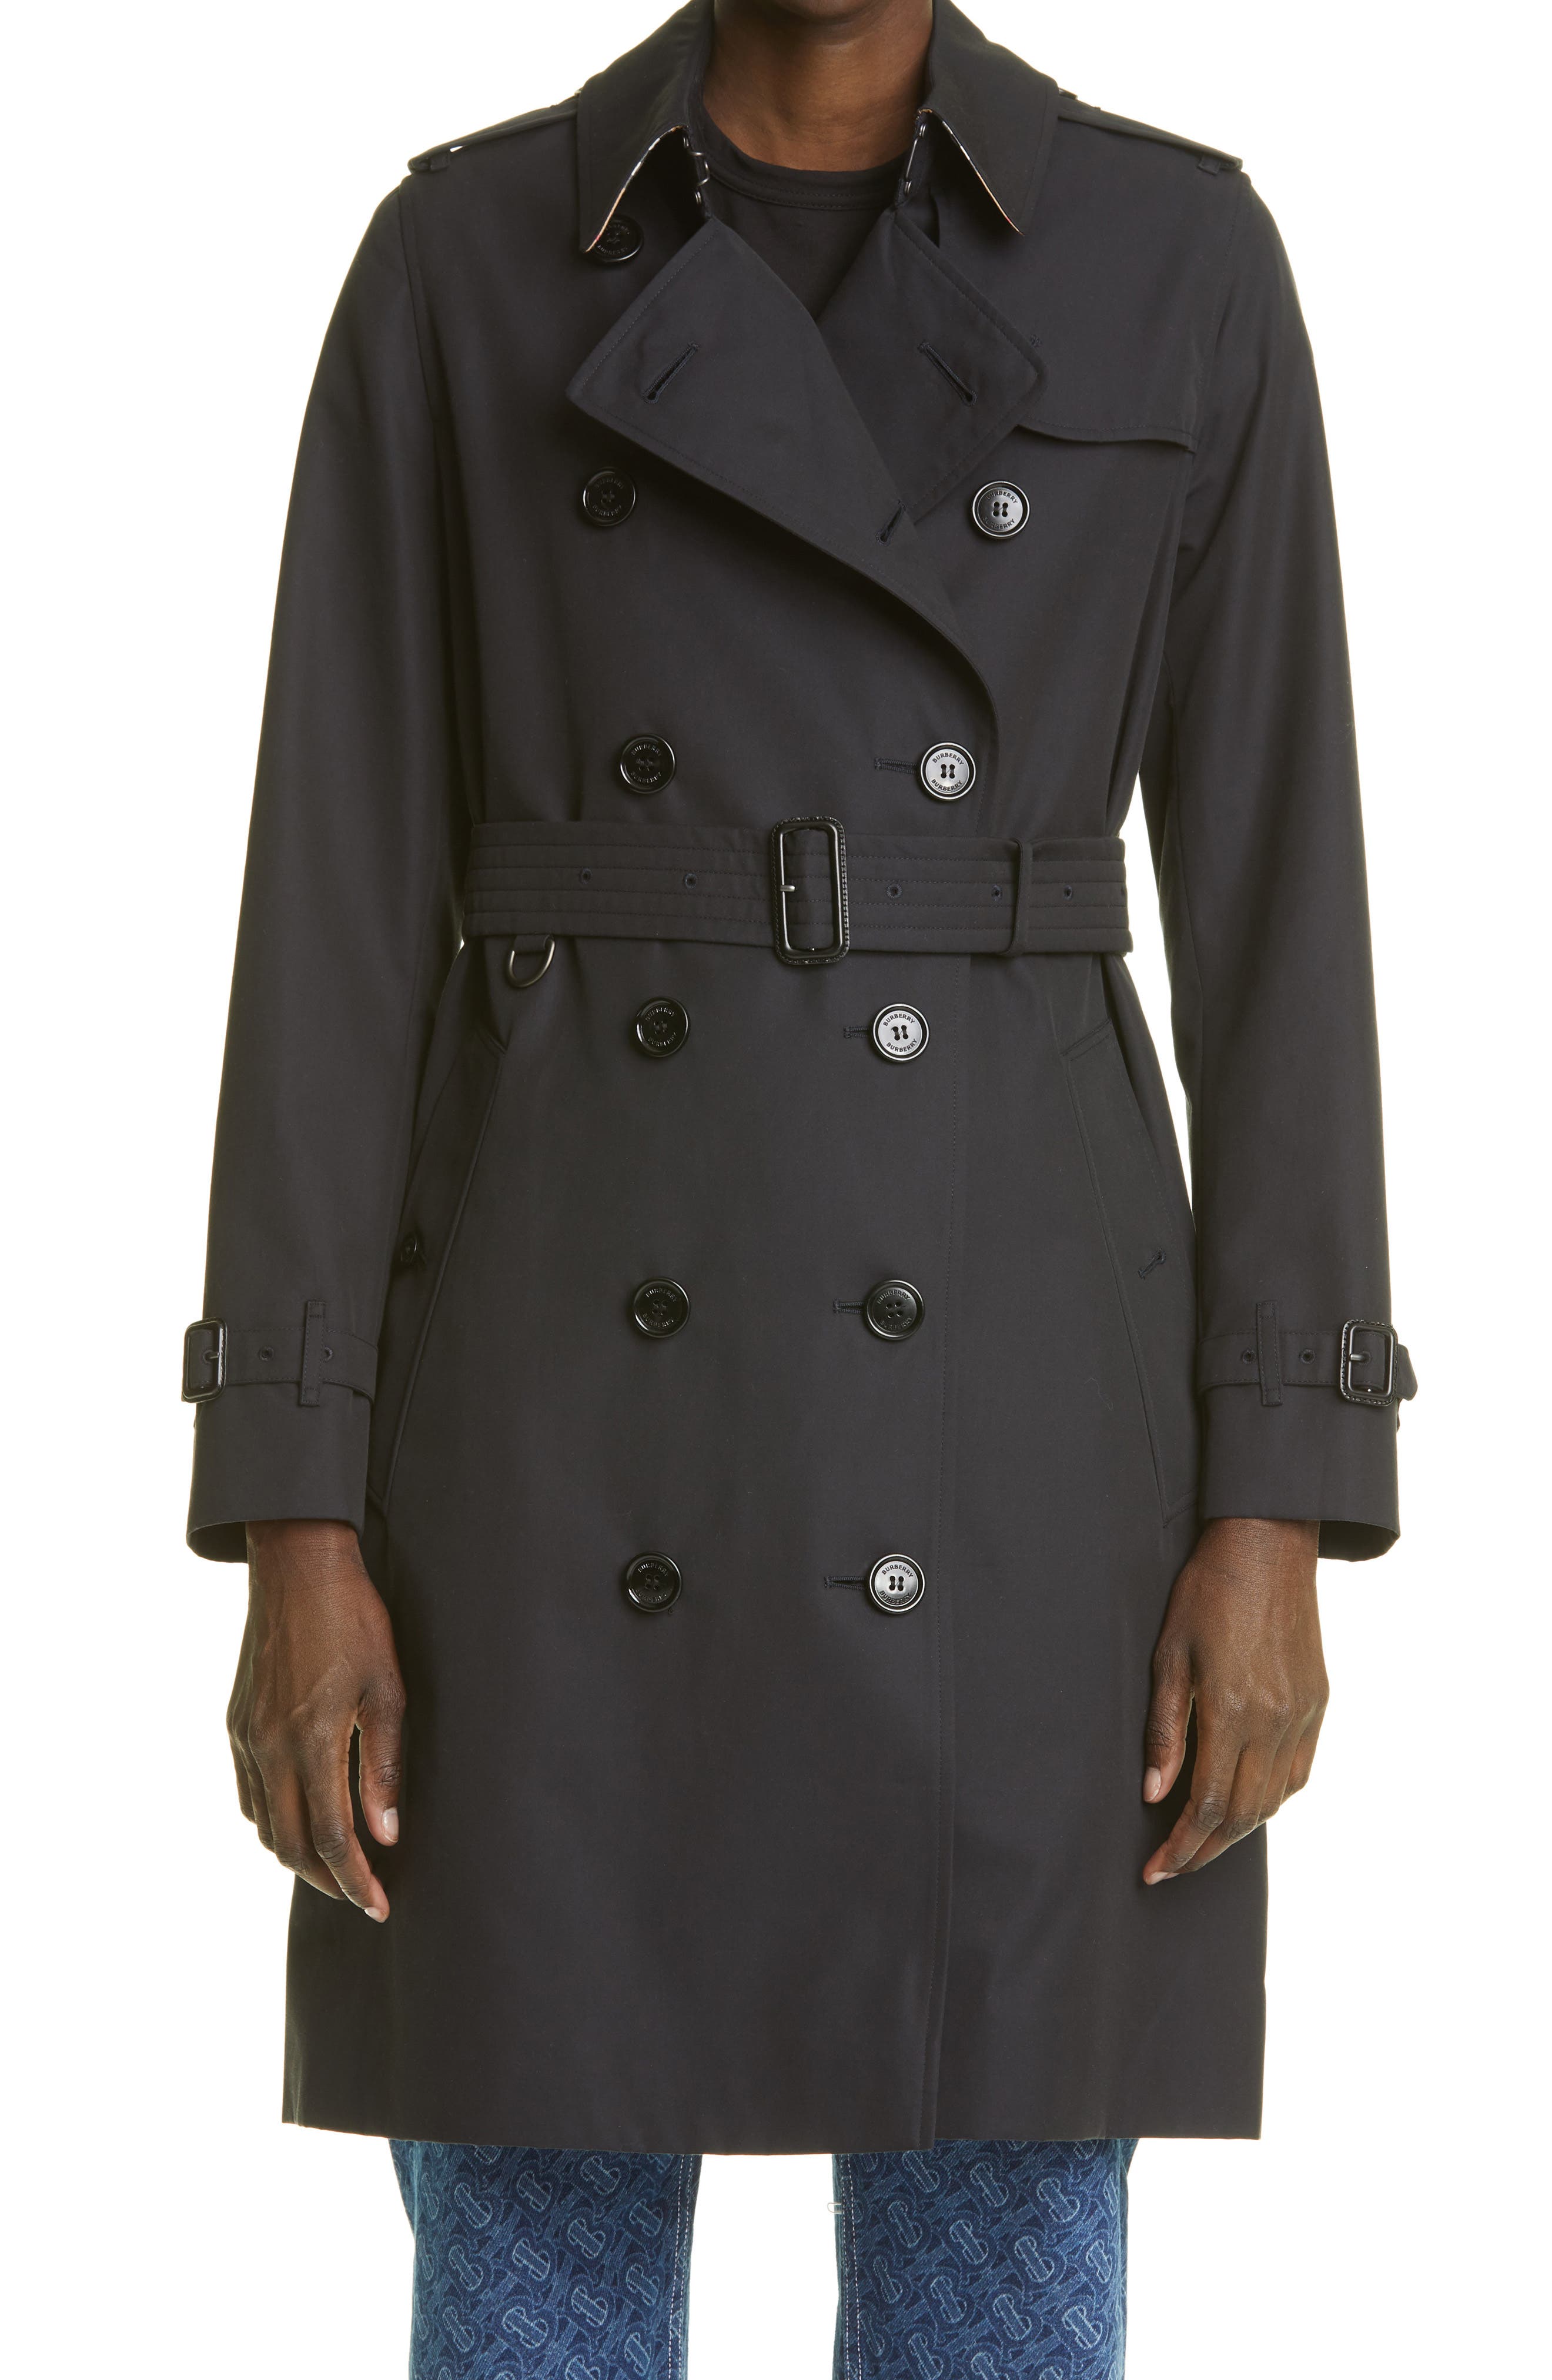 Women's Double Breasted Water Proof Cotton The Kensington Trench Coat Outwear 